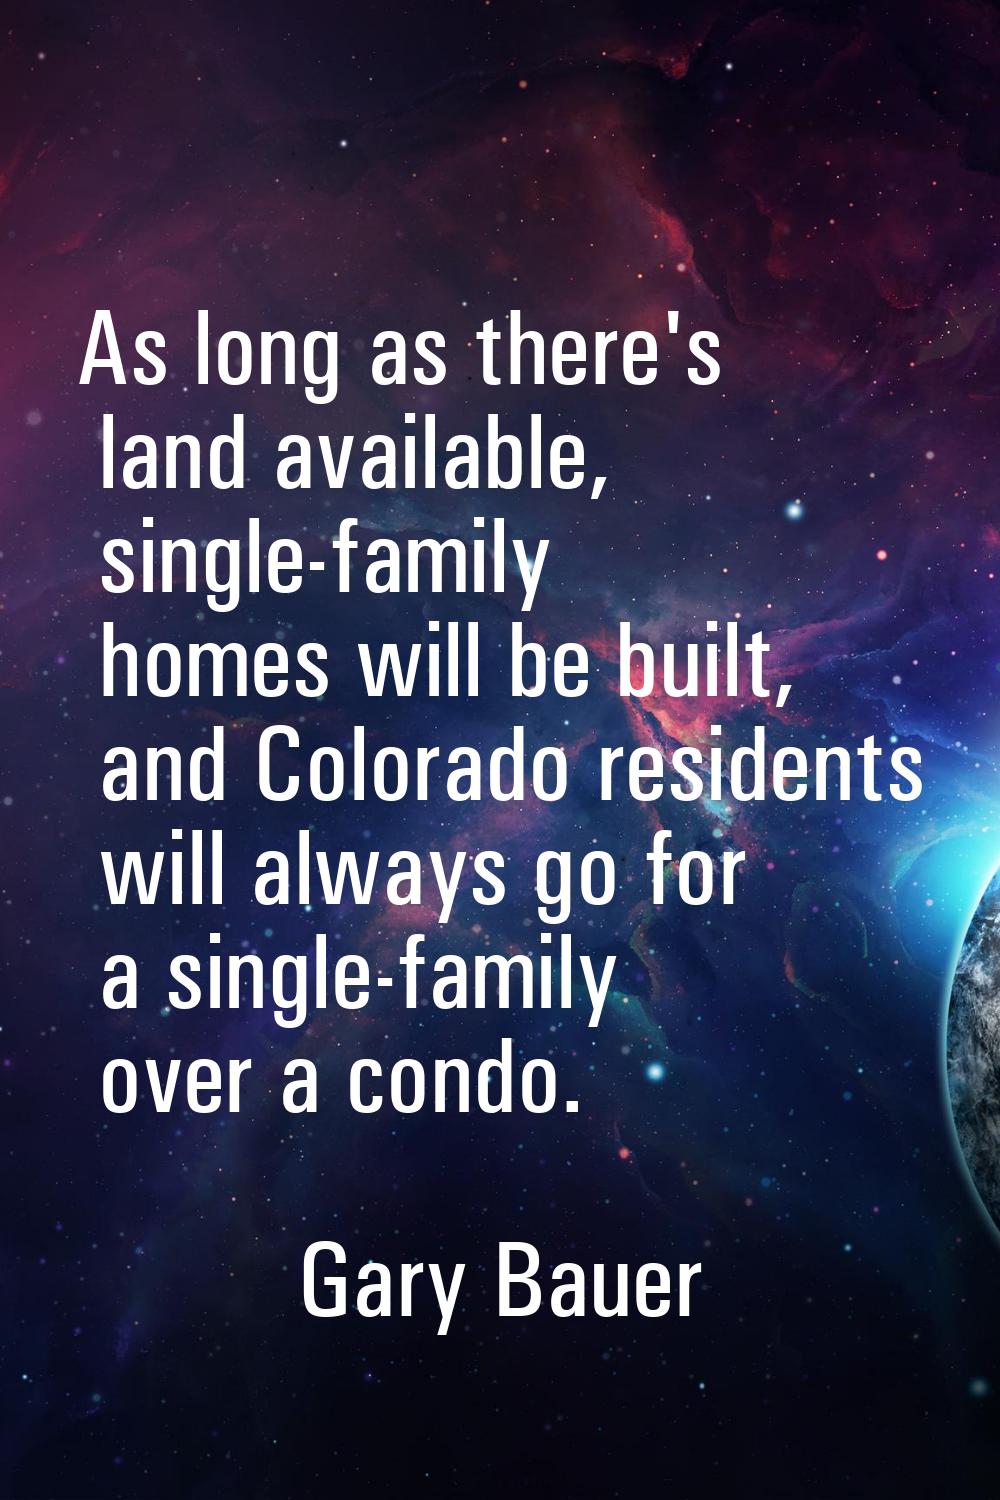 As long as there's land available, single-family homes will be built, and Colorado residents will a